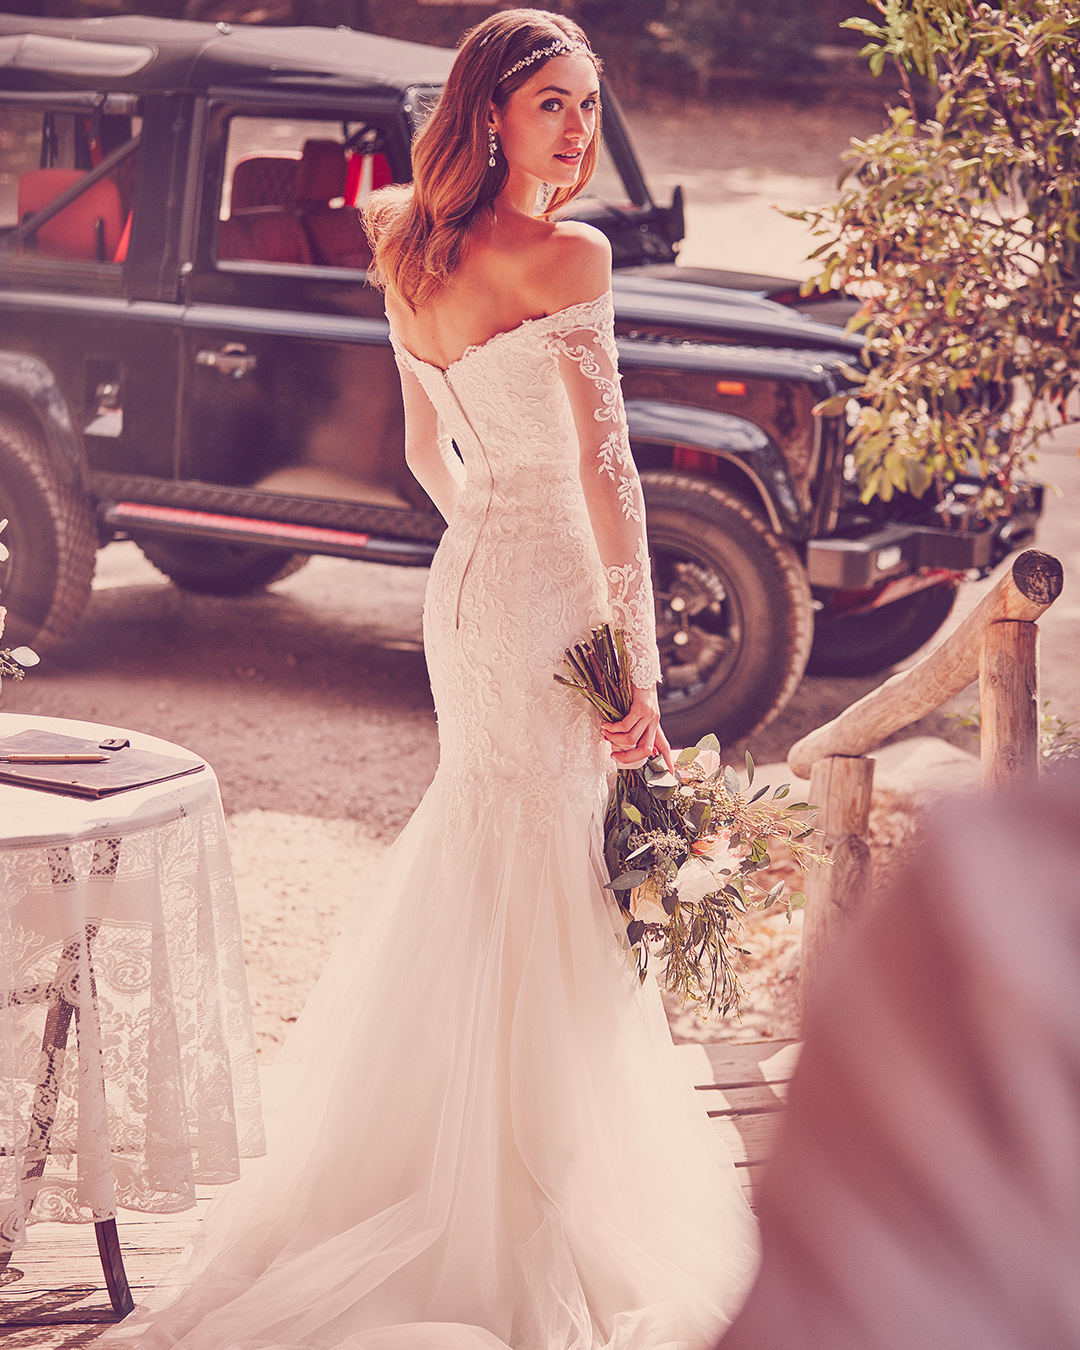 Bride from behind in a long sleeve off-the-shoulder trumpet wedding dress with lace details